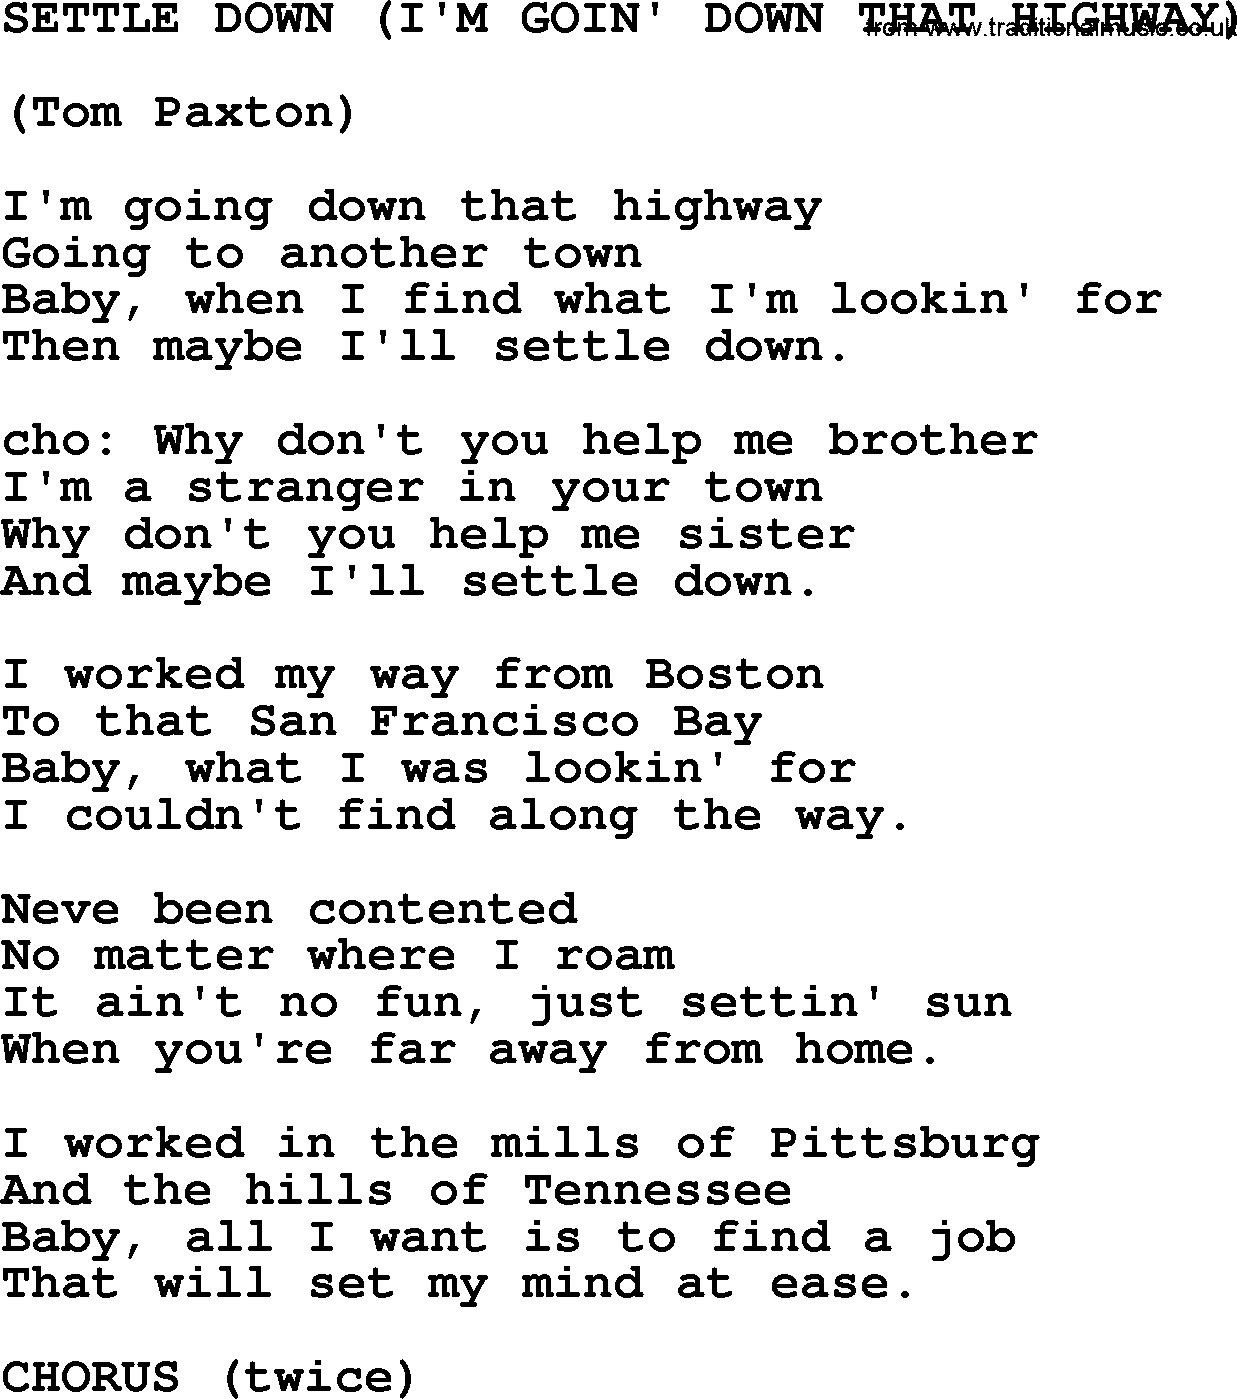 Tom Paxton song: Settle Down (i'm Goin' Down That Highway), lyrics